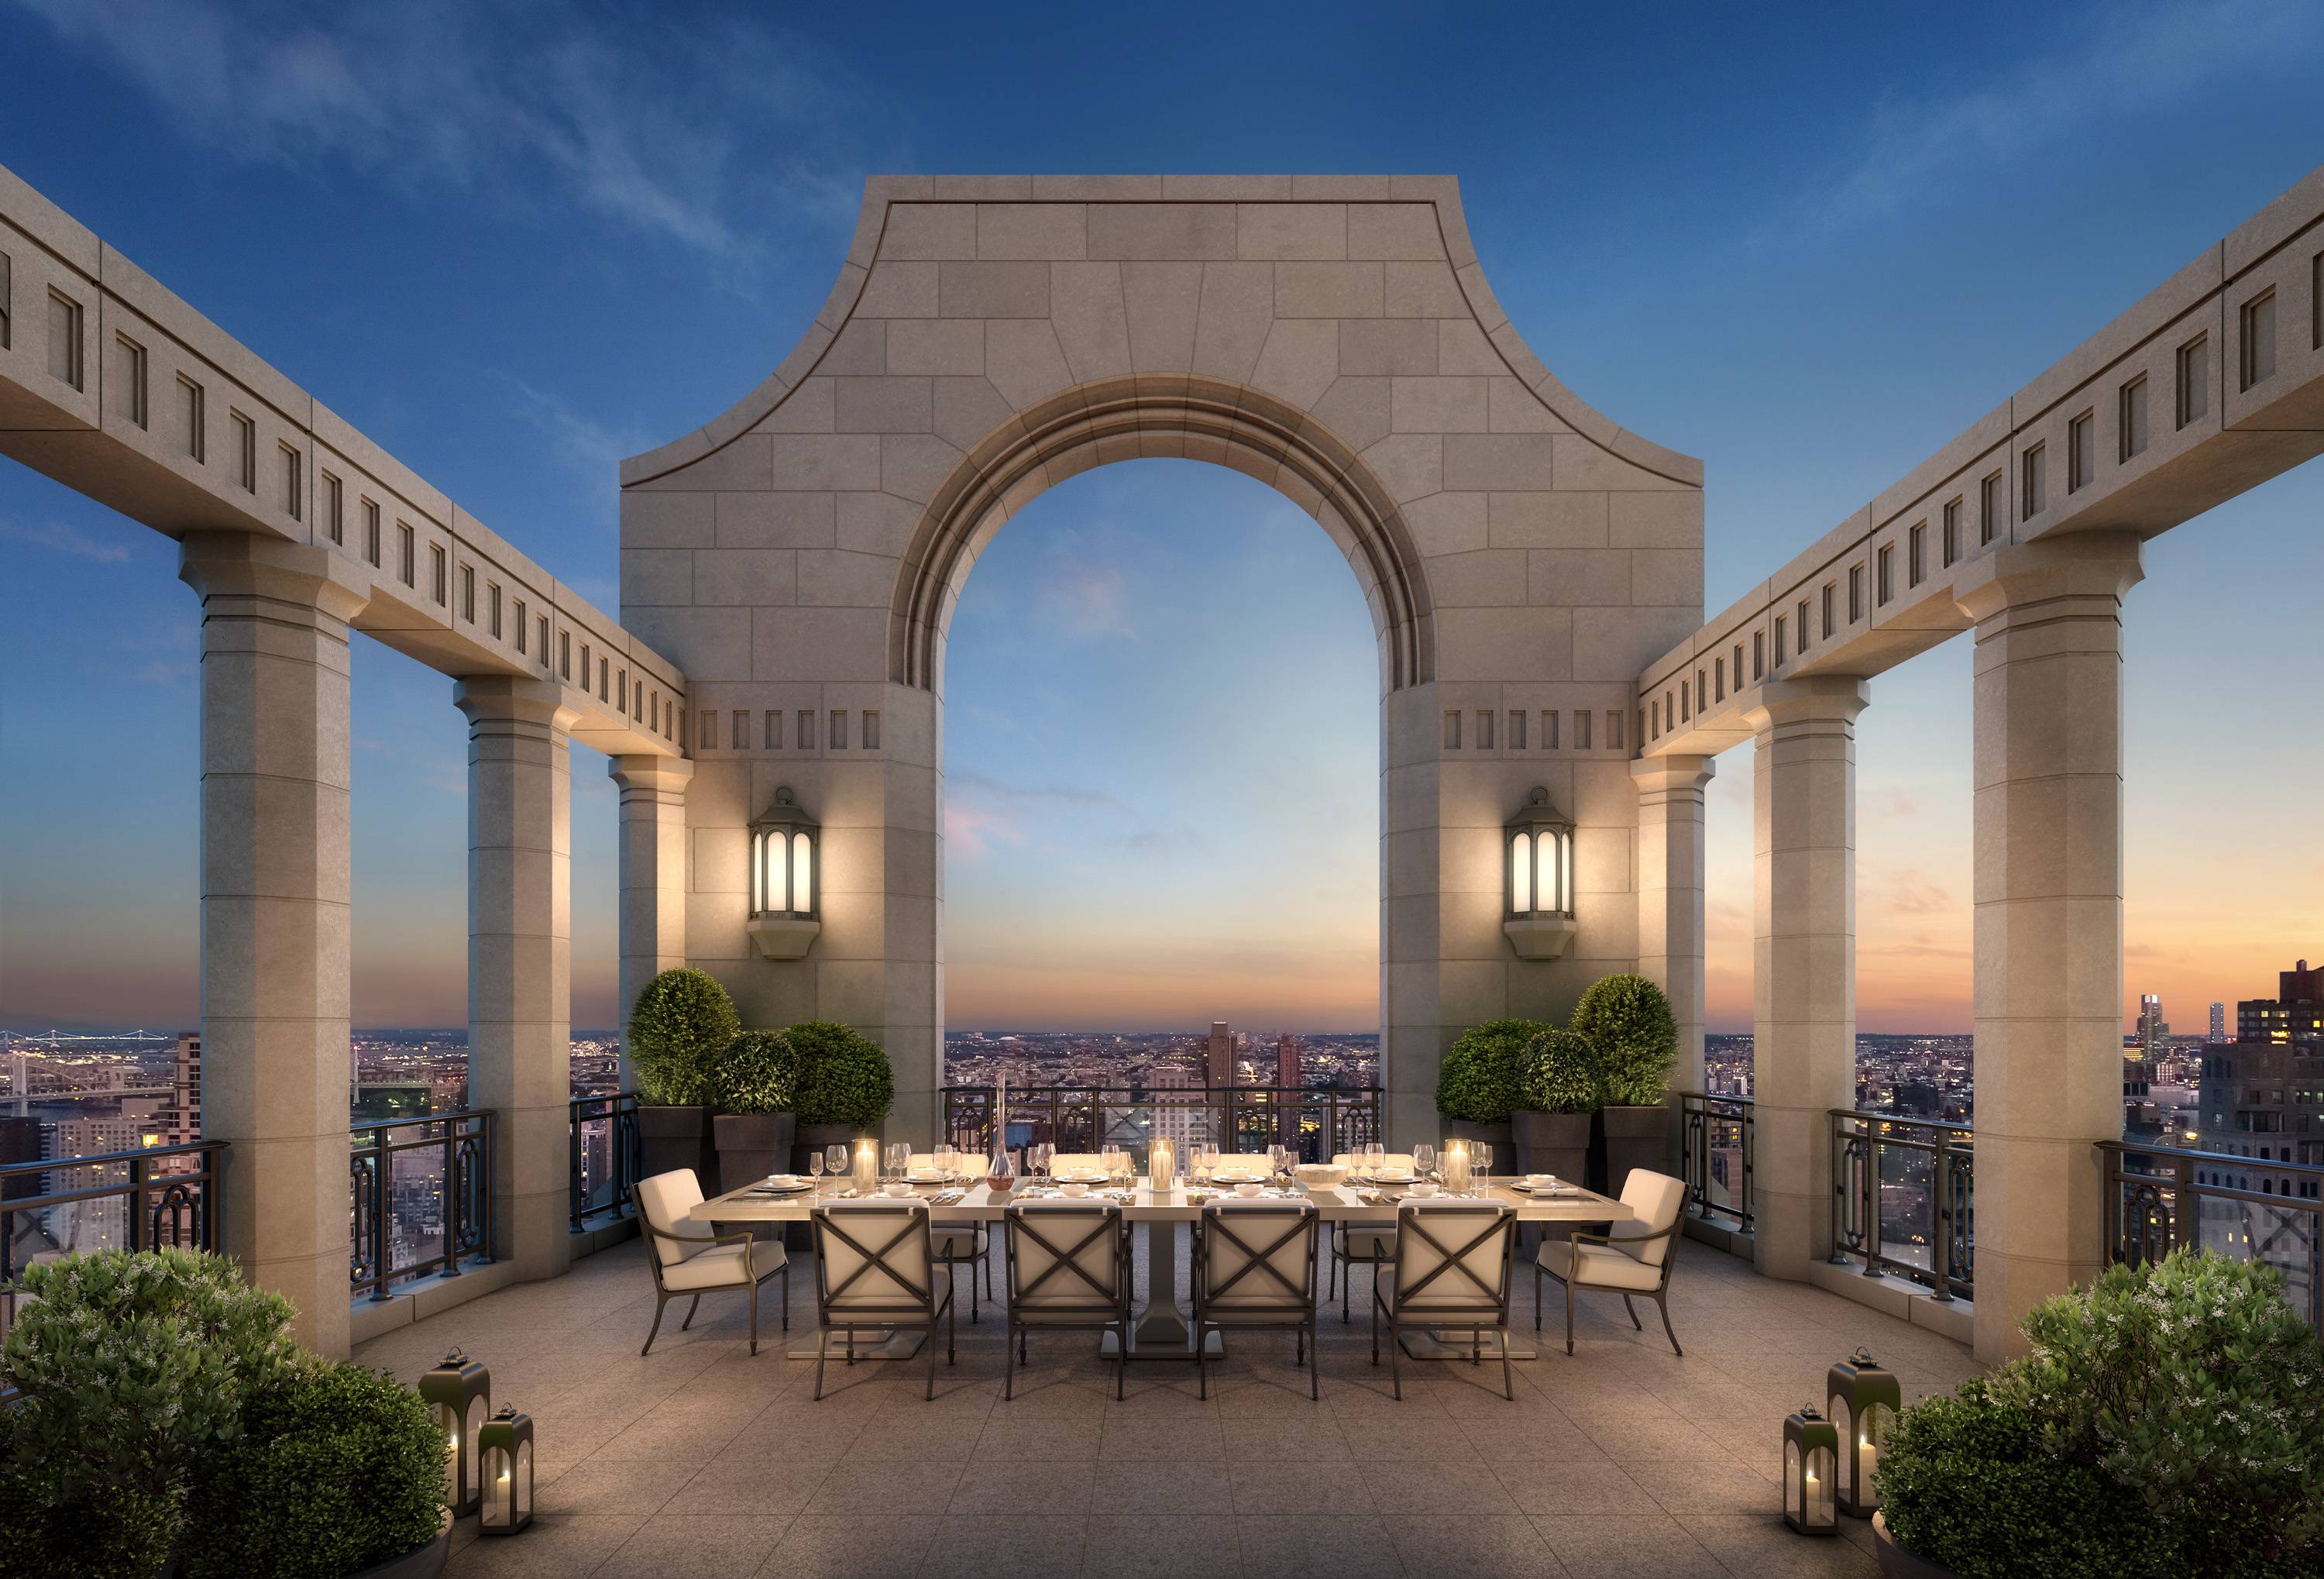 Penthouse C is an amazing and rare 6, 592 square foot duplex residence at the very top of 200 East 83rd Street with spectacular wraparound views of Central Park and ...